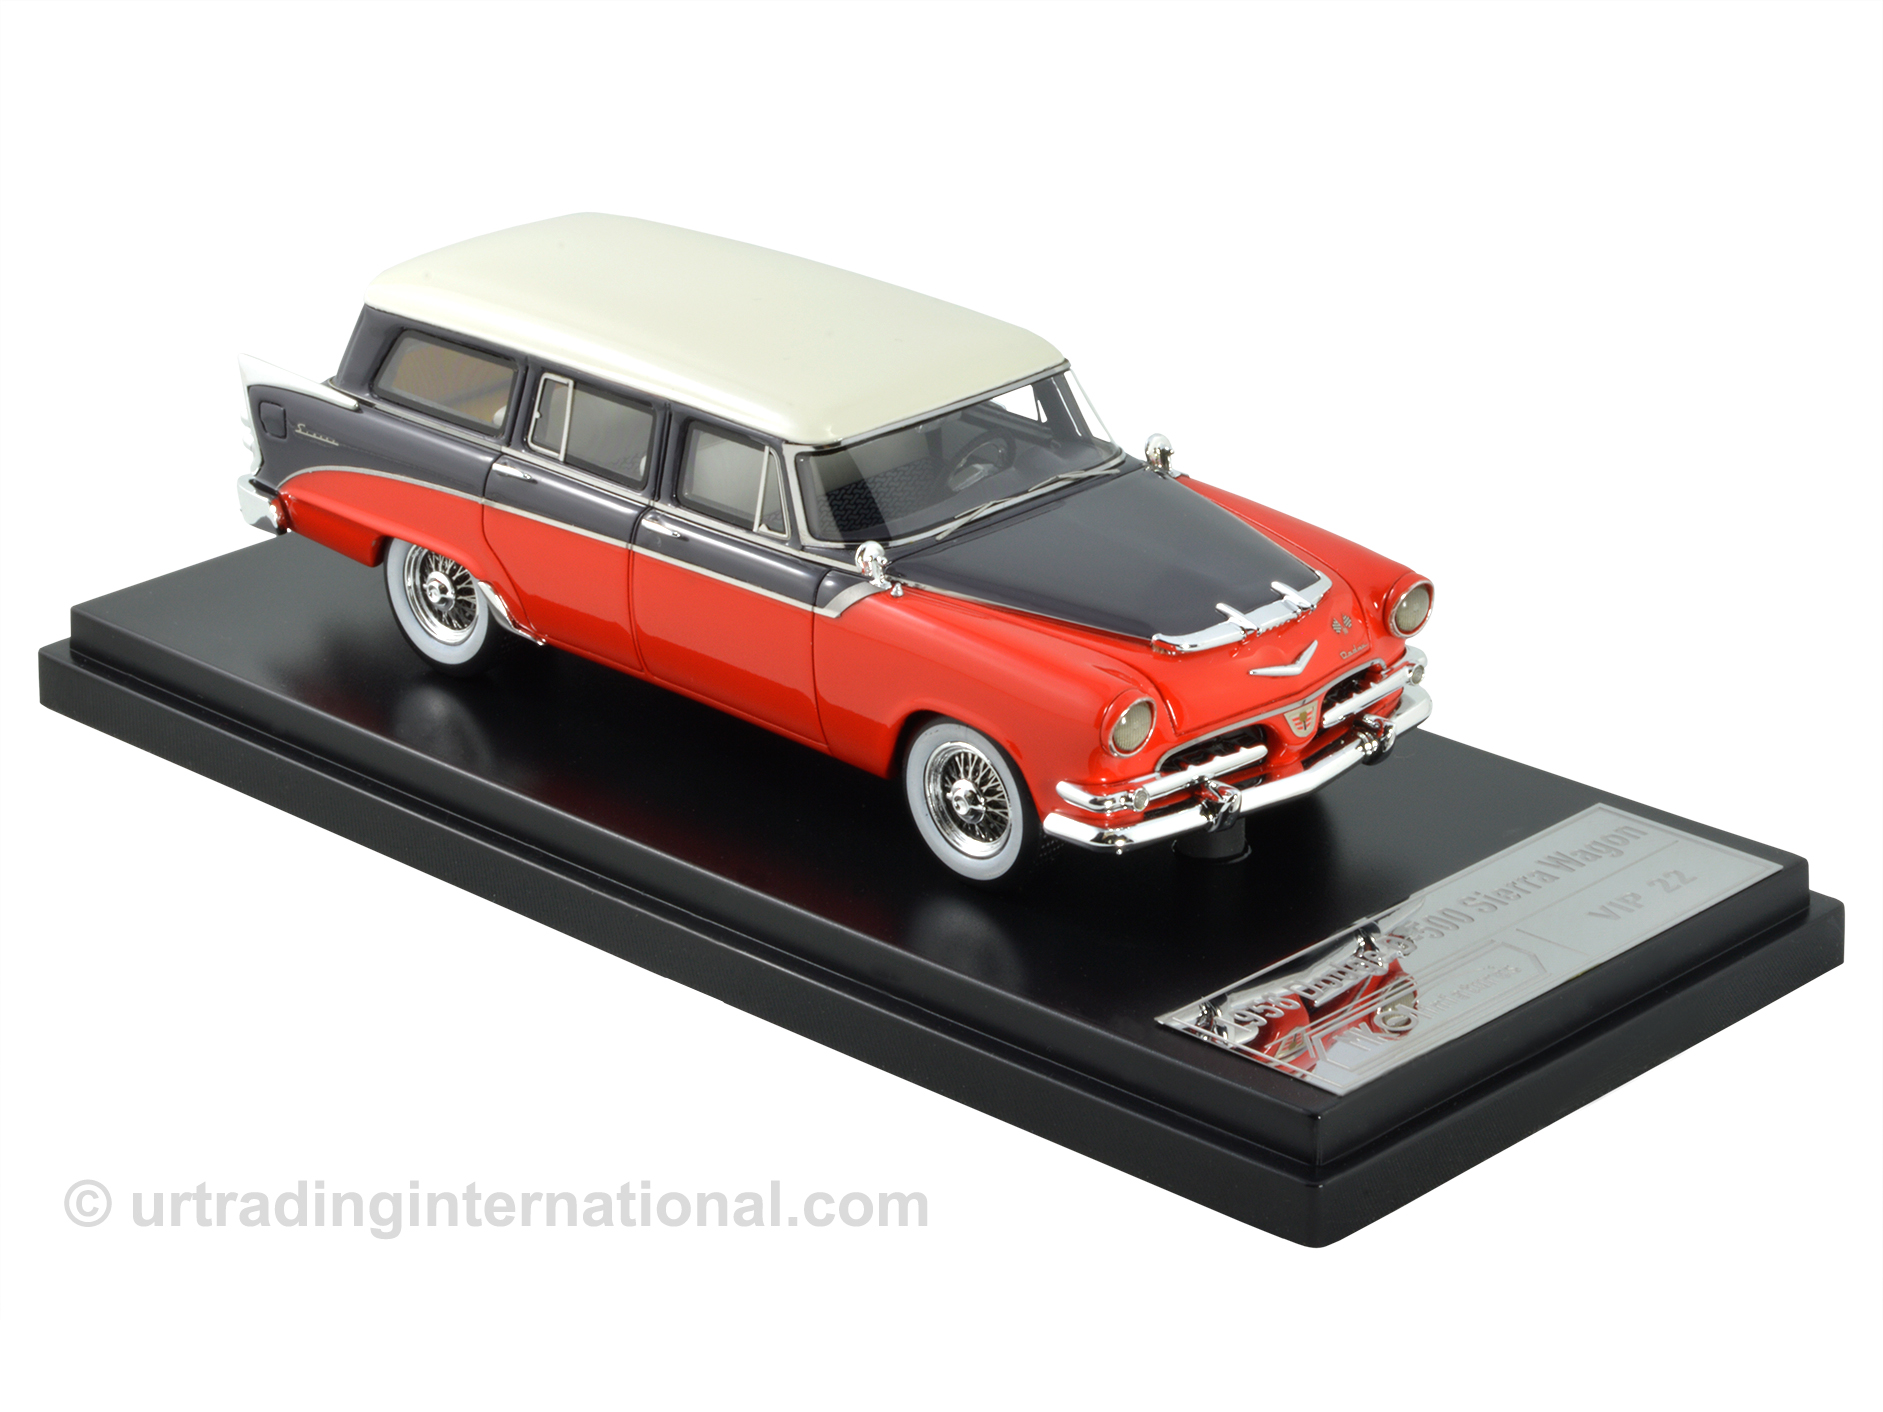 1956 Dodge Sierra Station Wagon – Red/Charcoal/White